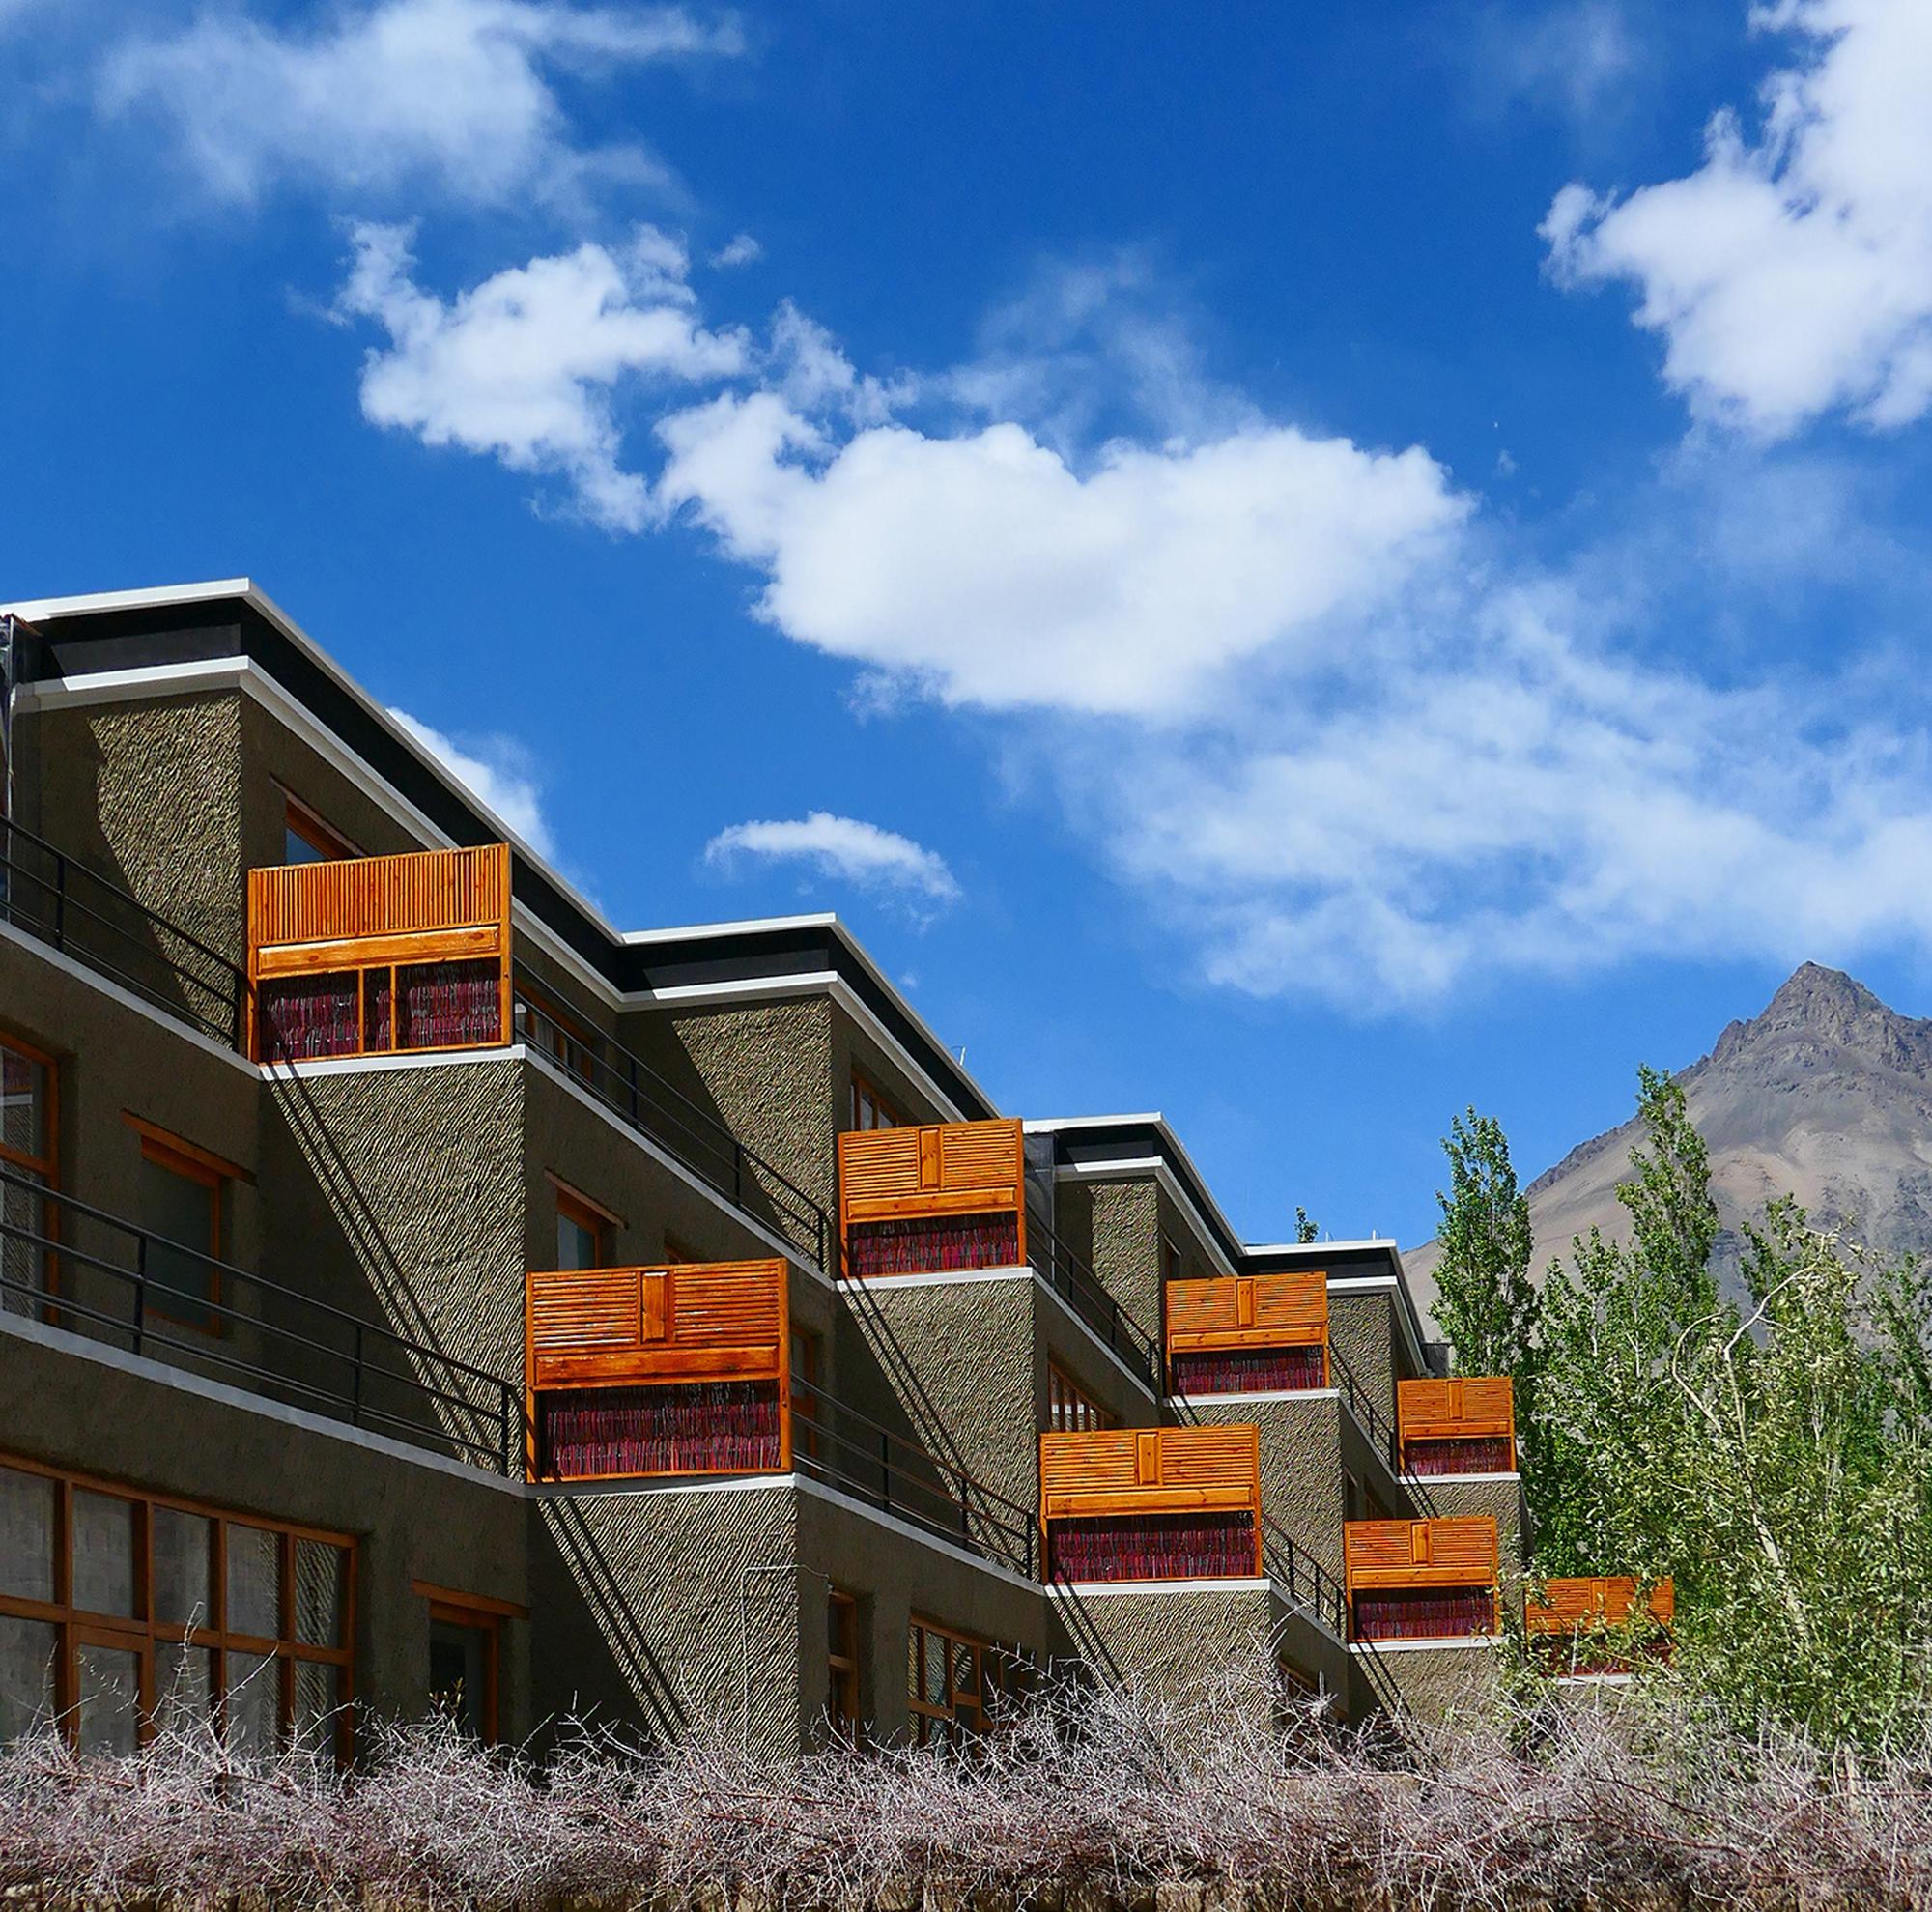 The Practice of Timeless Architecture, Earthling Ladakh, Future Trajectories | Dialogues 11